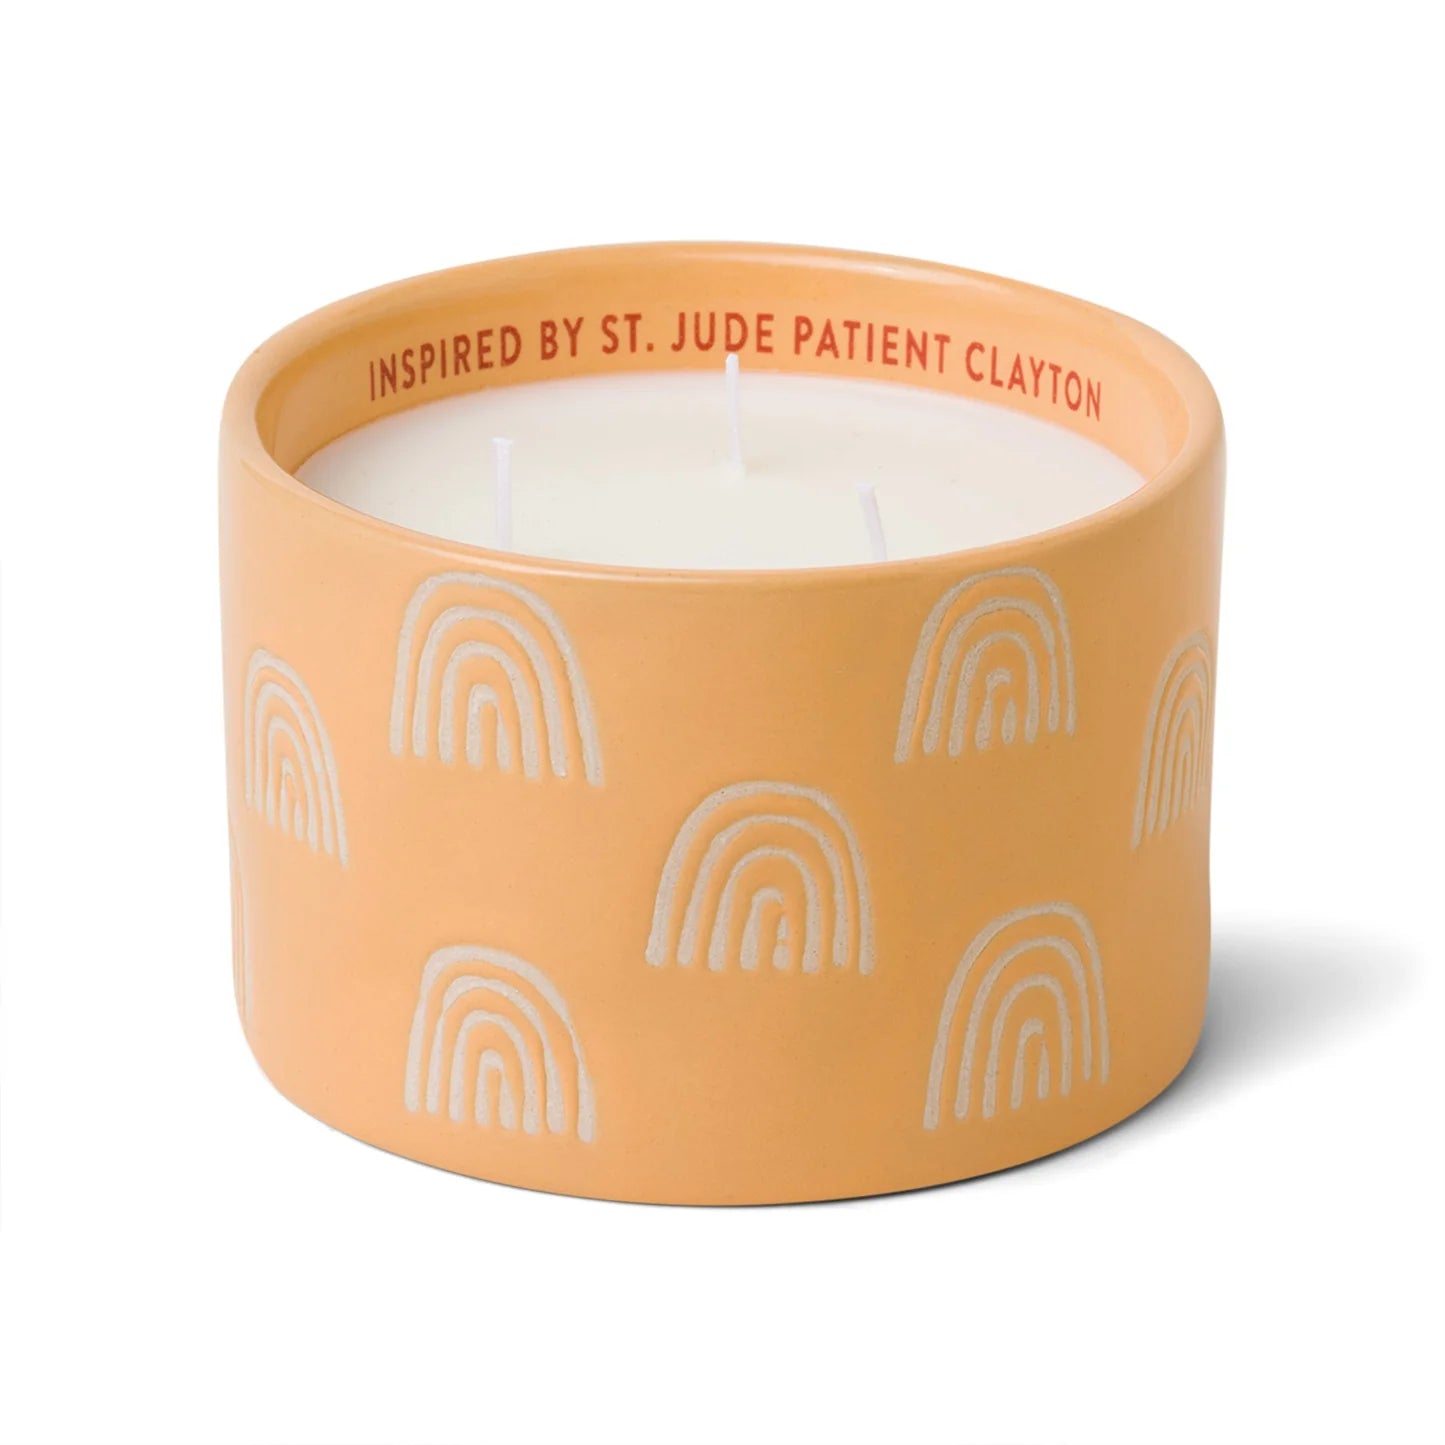 St. Jude Giveback "Possibilities" 11 oz. Candle - Cactus Flower